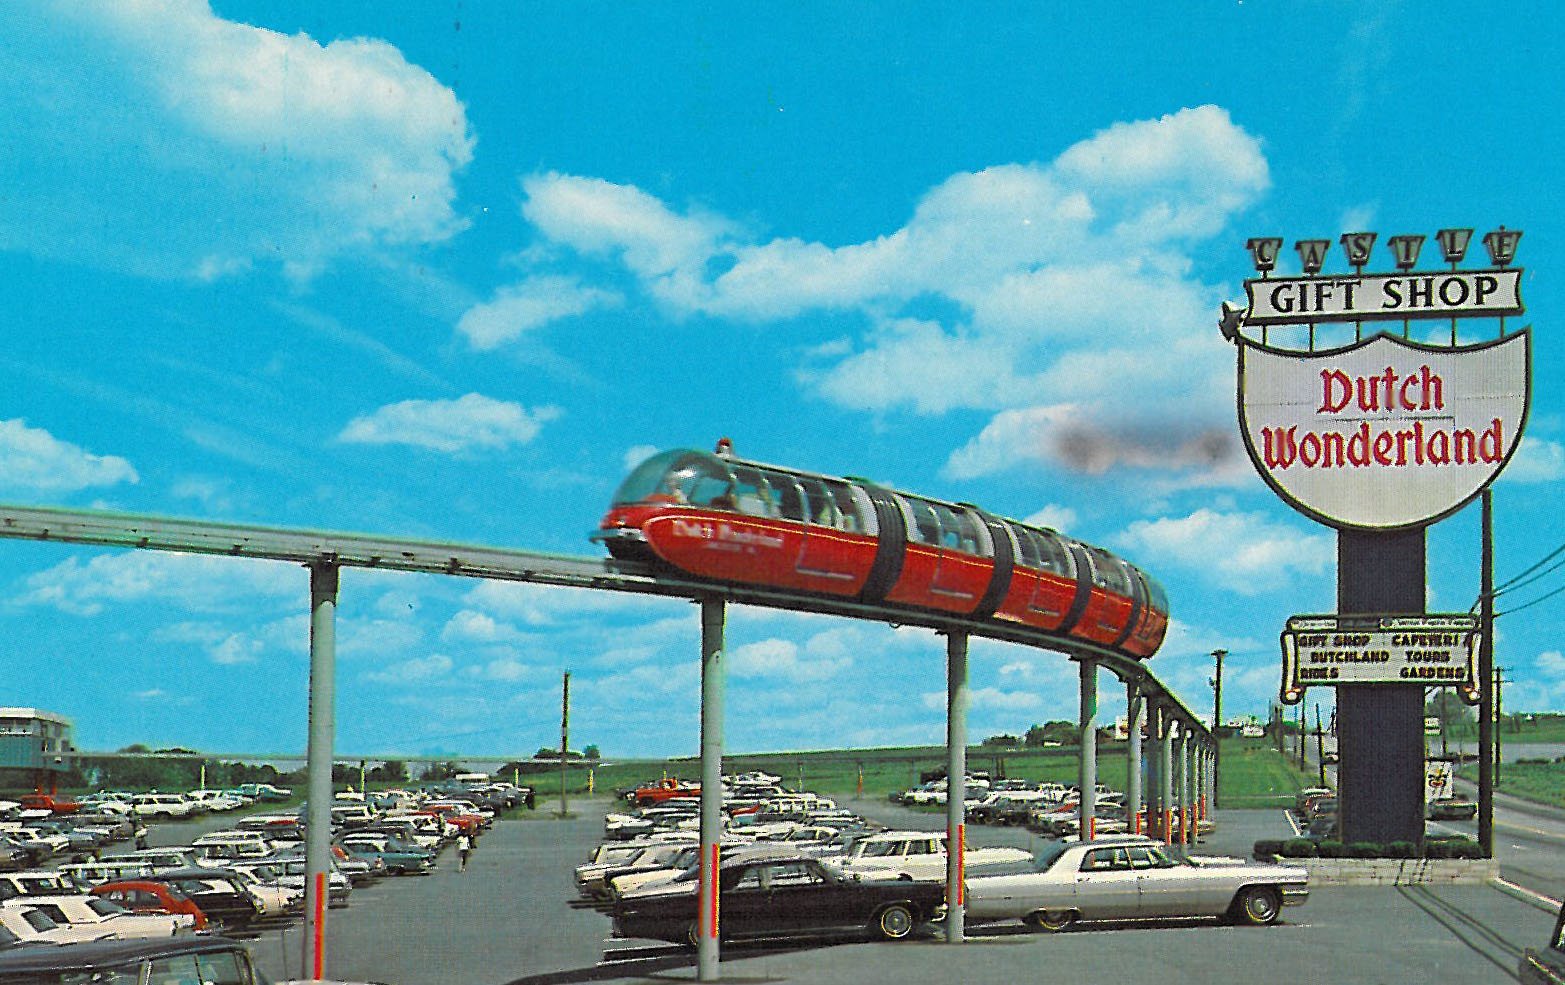 Postcard With Monorail